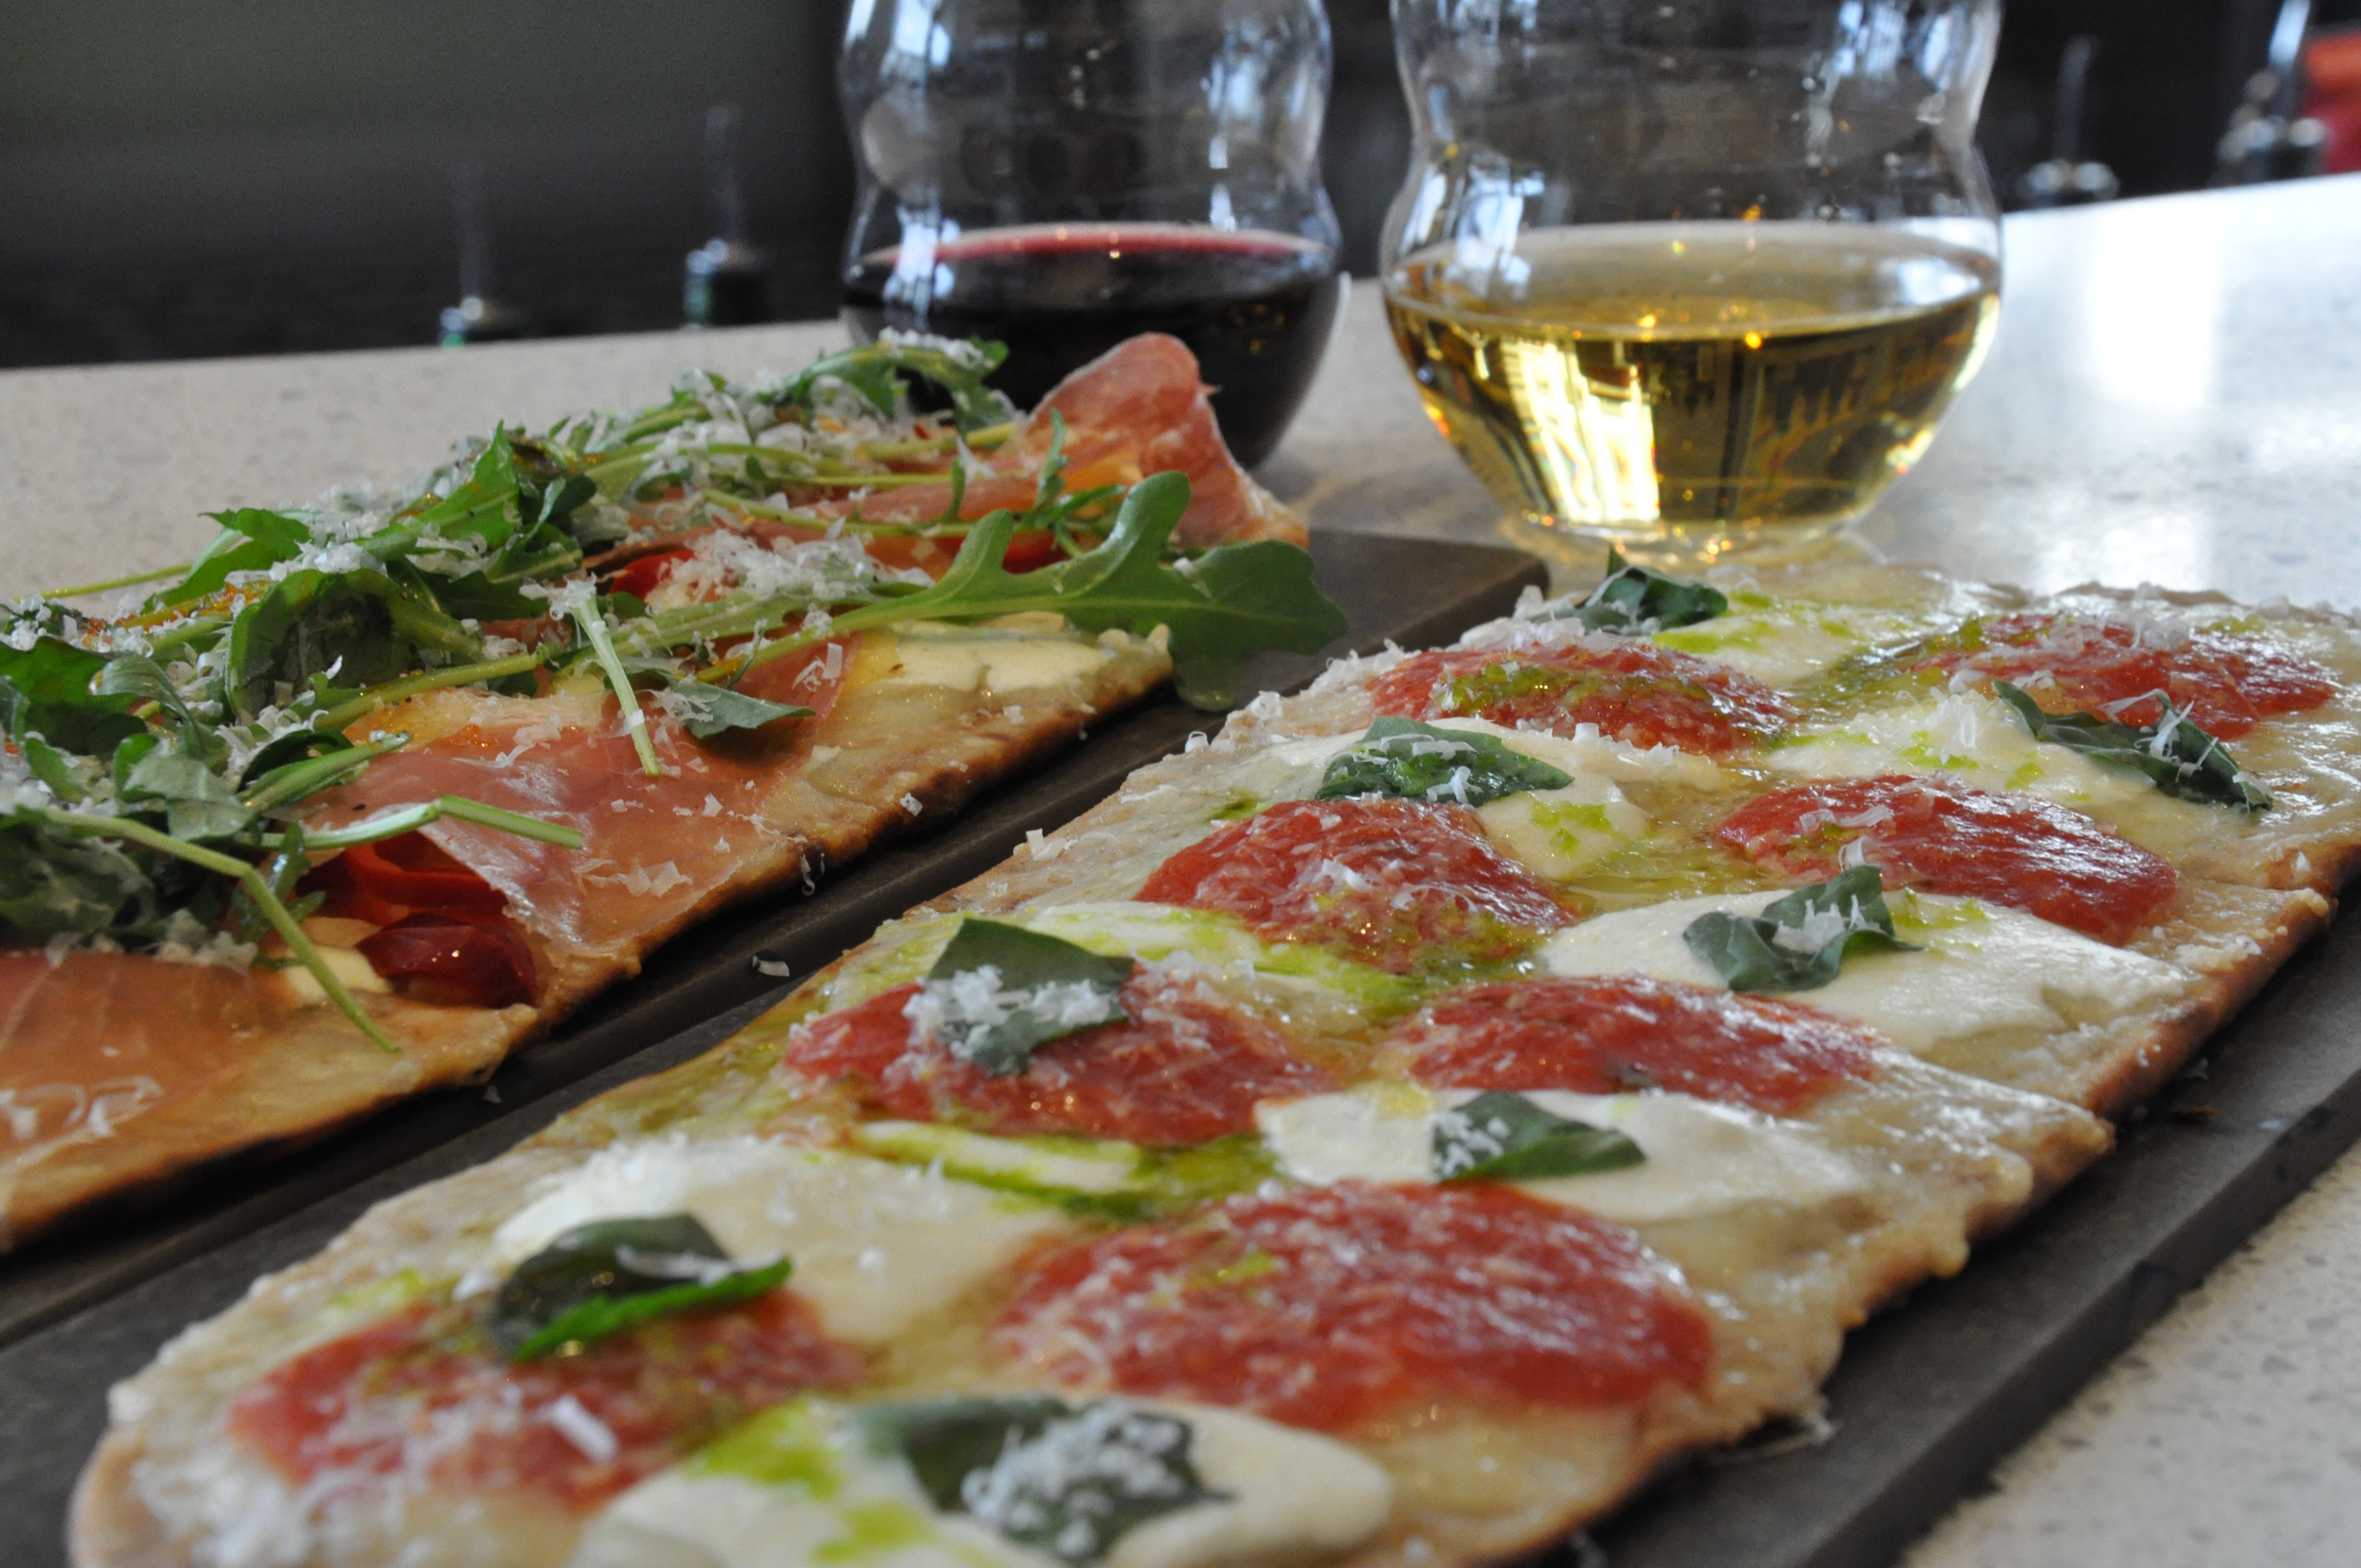 A perfect blend: Pizza Vinoteca takes the pie for pizza and wine in Ballston